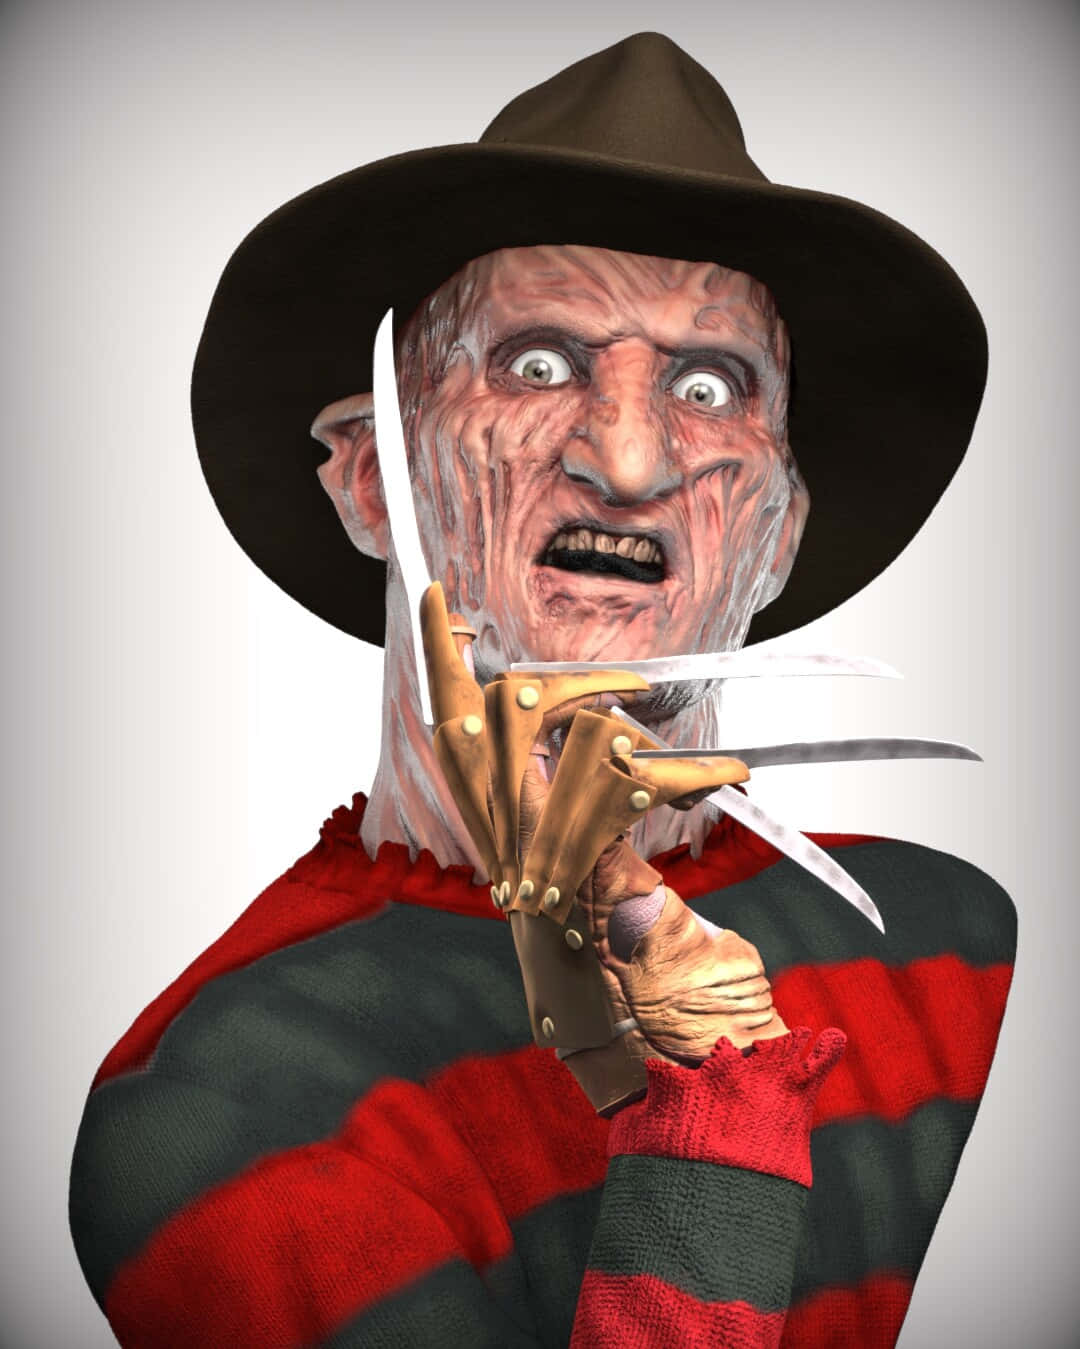 Freddy Krueger with his iconic red and green sweater